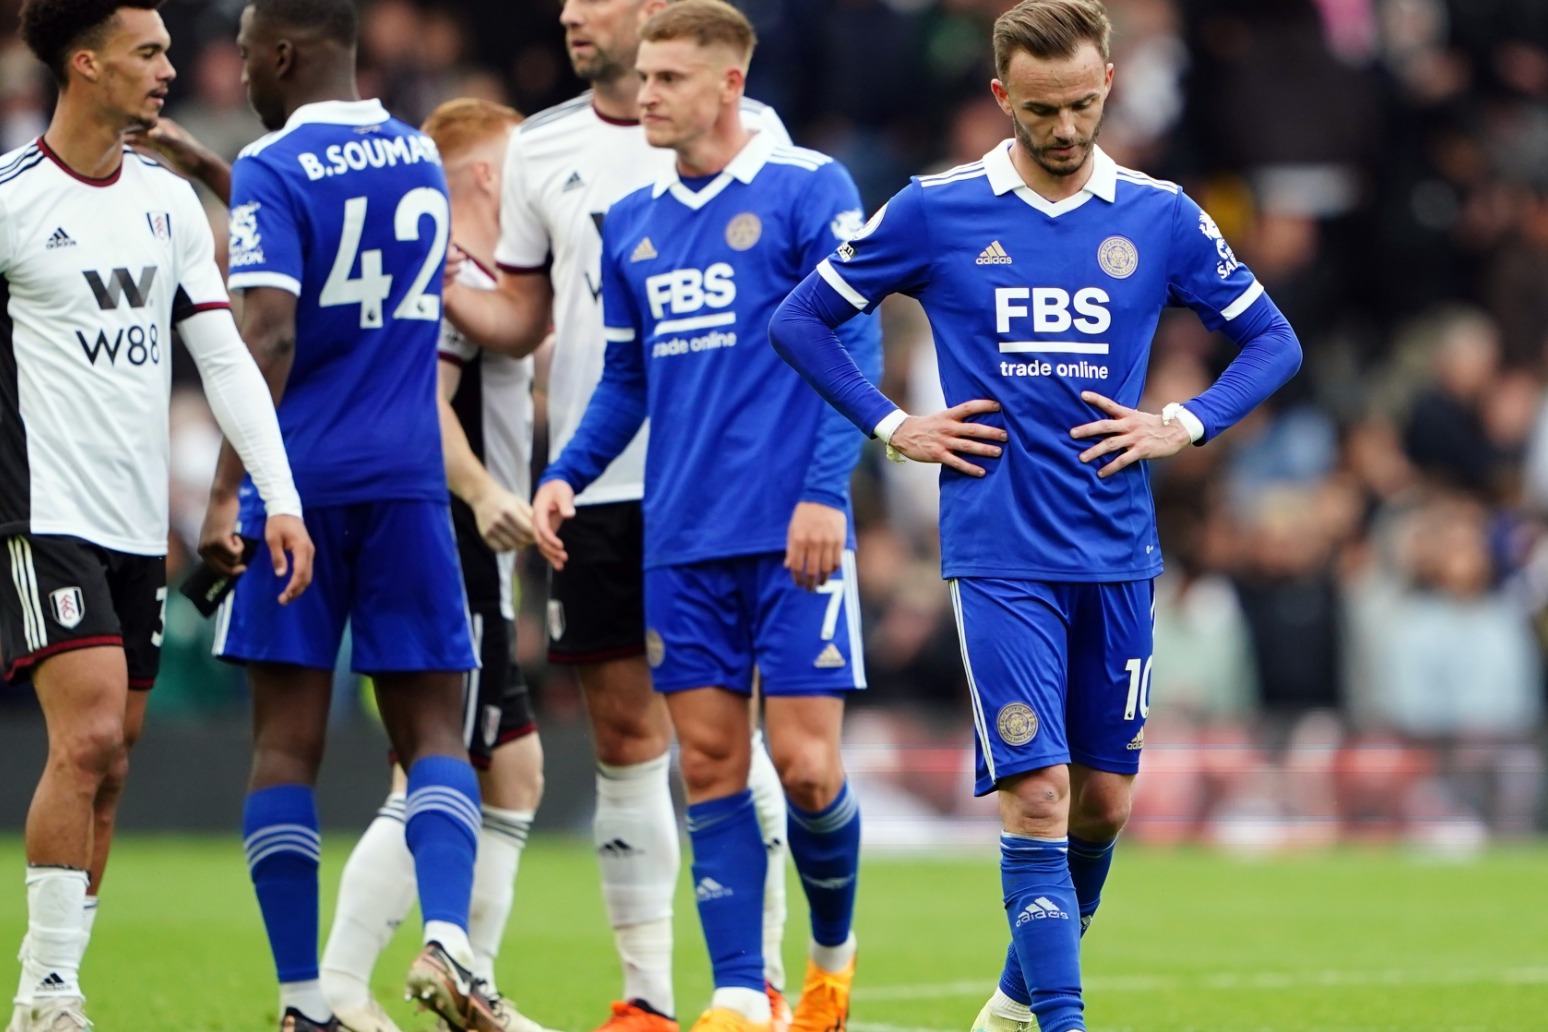 Leicester humbled after first half horror show 